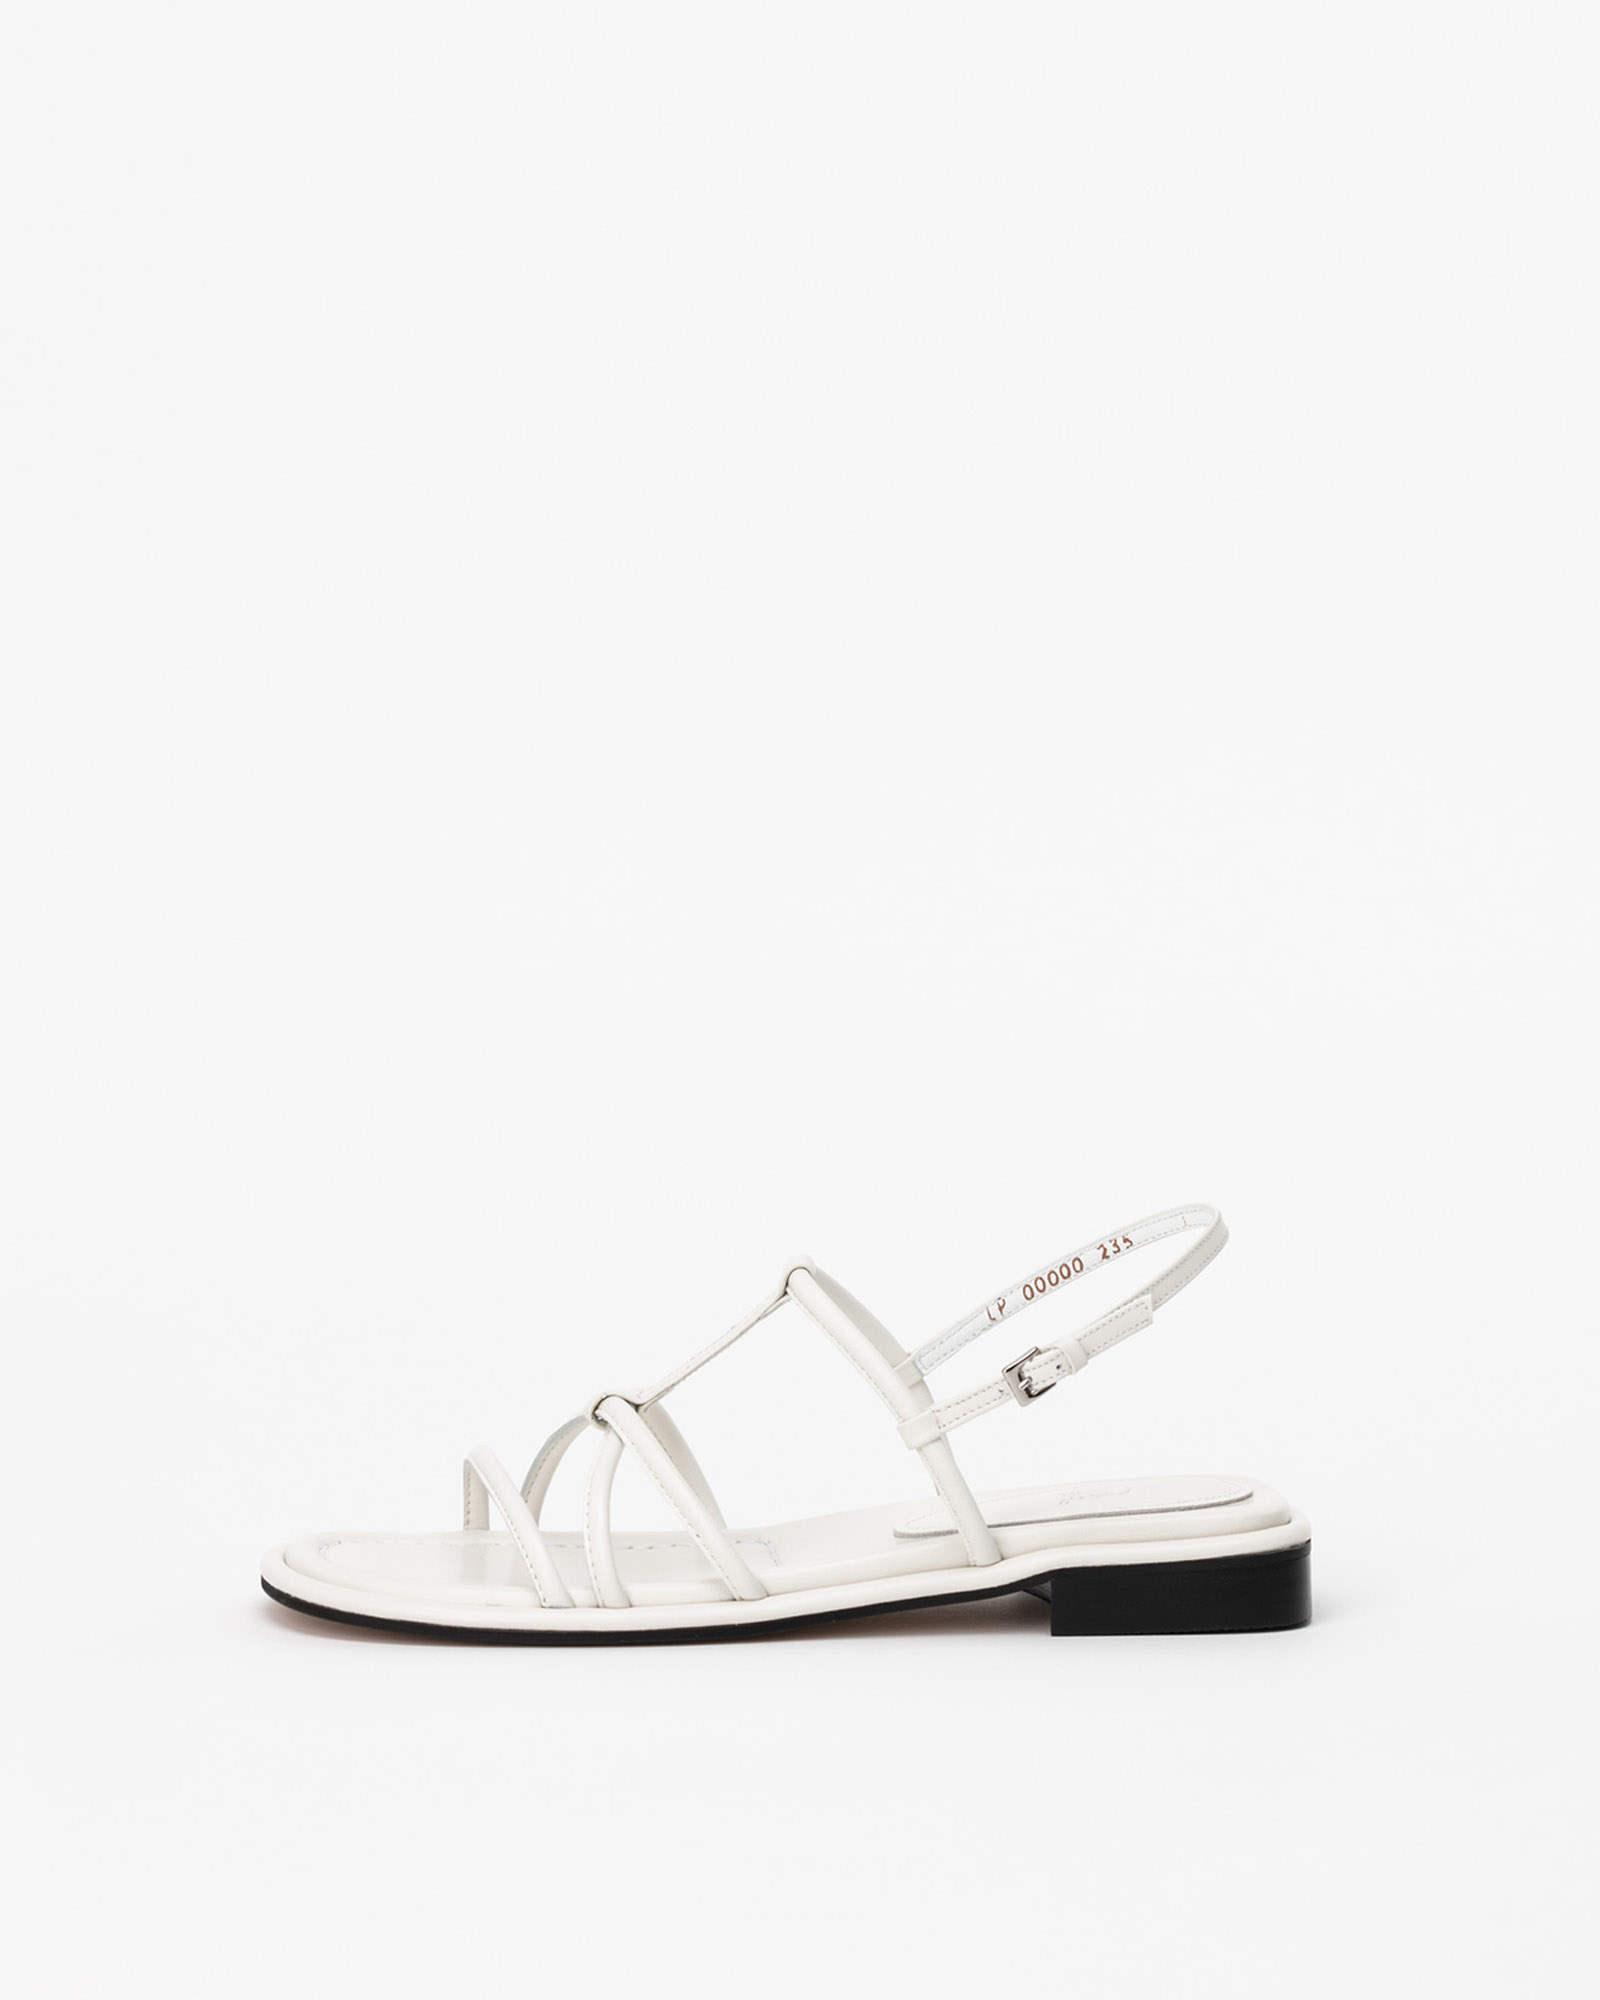 Restee Padded Strap Flat Sandals in Pure White